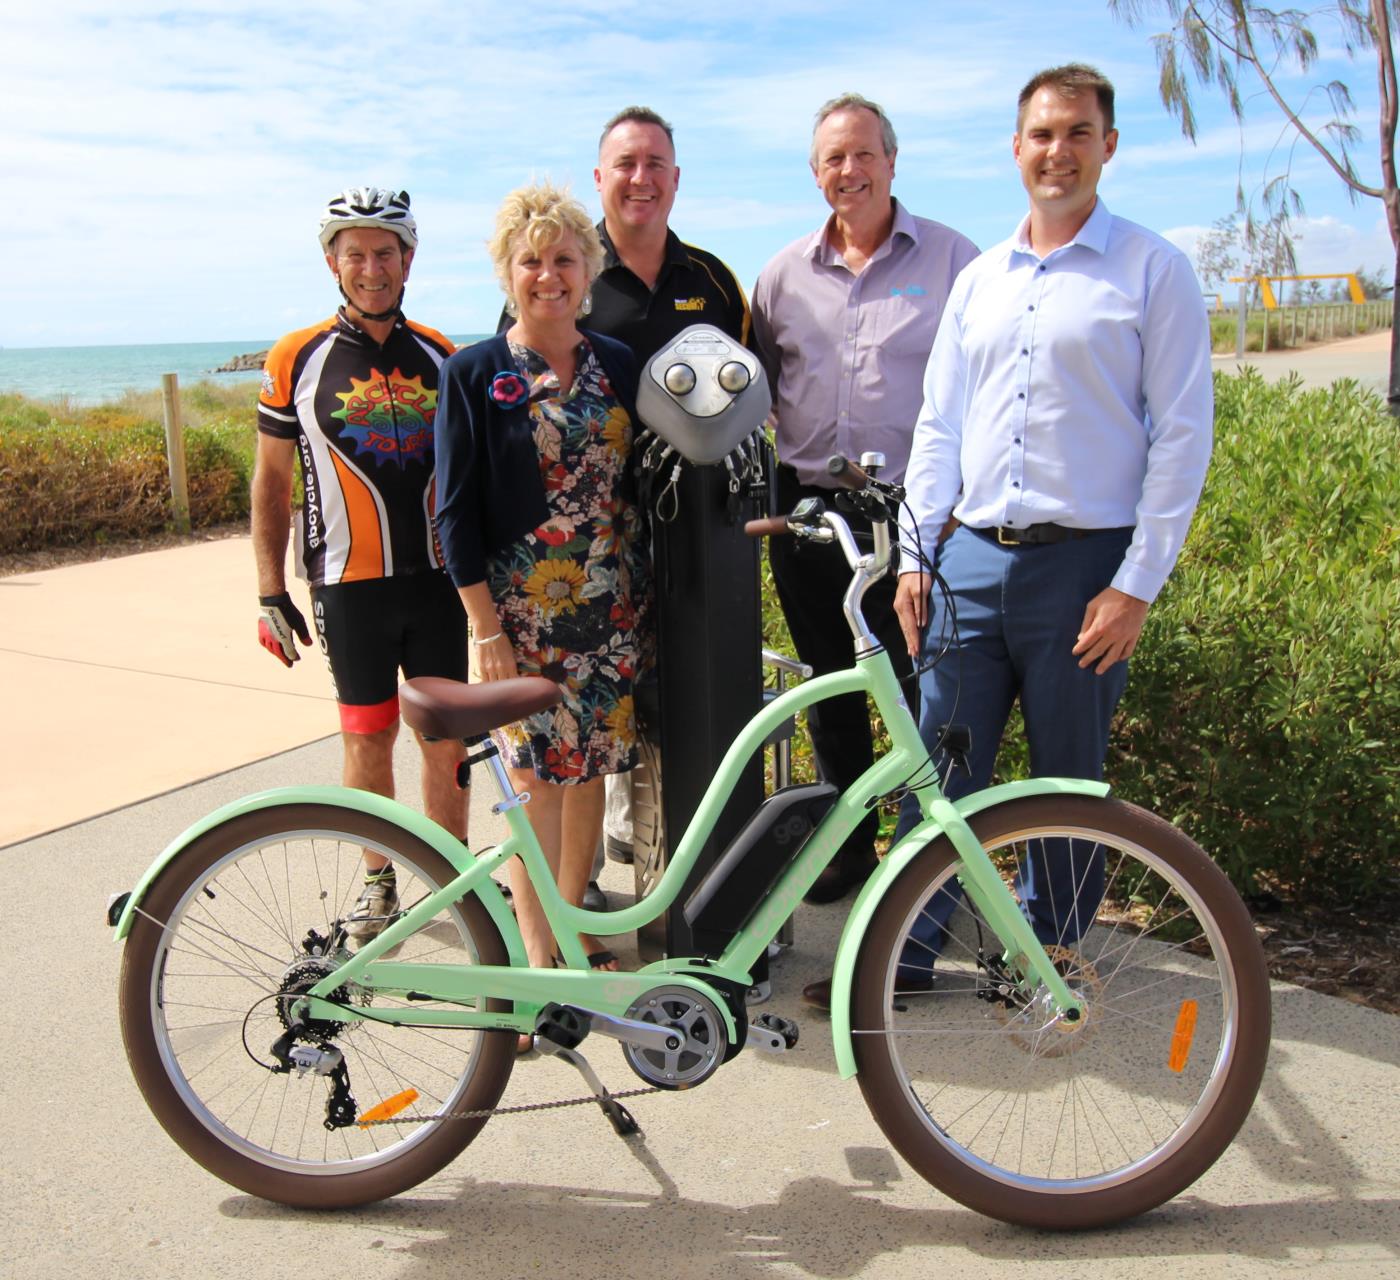 (From left) City of Greater Geraldton Councillor Michael Raymond, Lara Dalton MLA, Mayor Shane Van Styn, Mid West Sports Federation Chair Mike Bowley and Geraldton Cycle Advocacy Group member Shaun Dynan with the bike maintenance station recently installed at Midalias Beach.